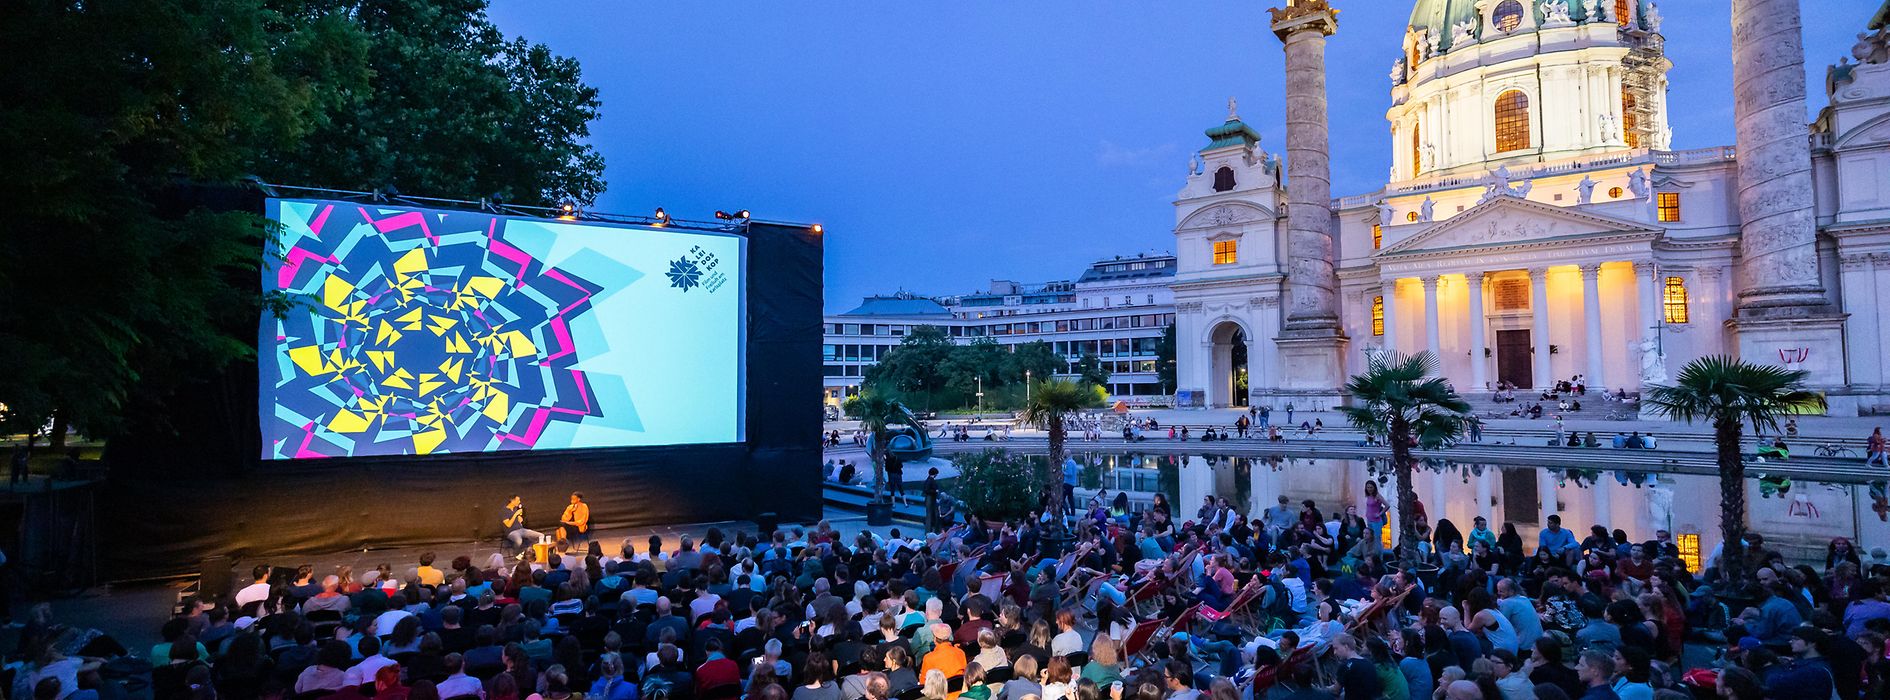 Open air cinema in front of St. Charles Church